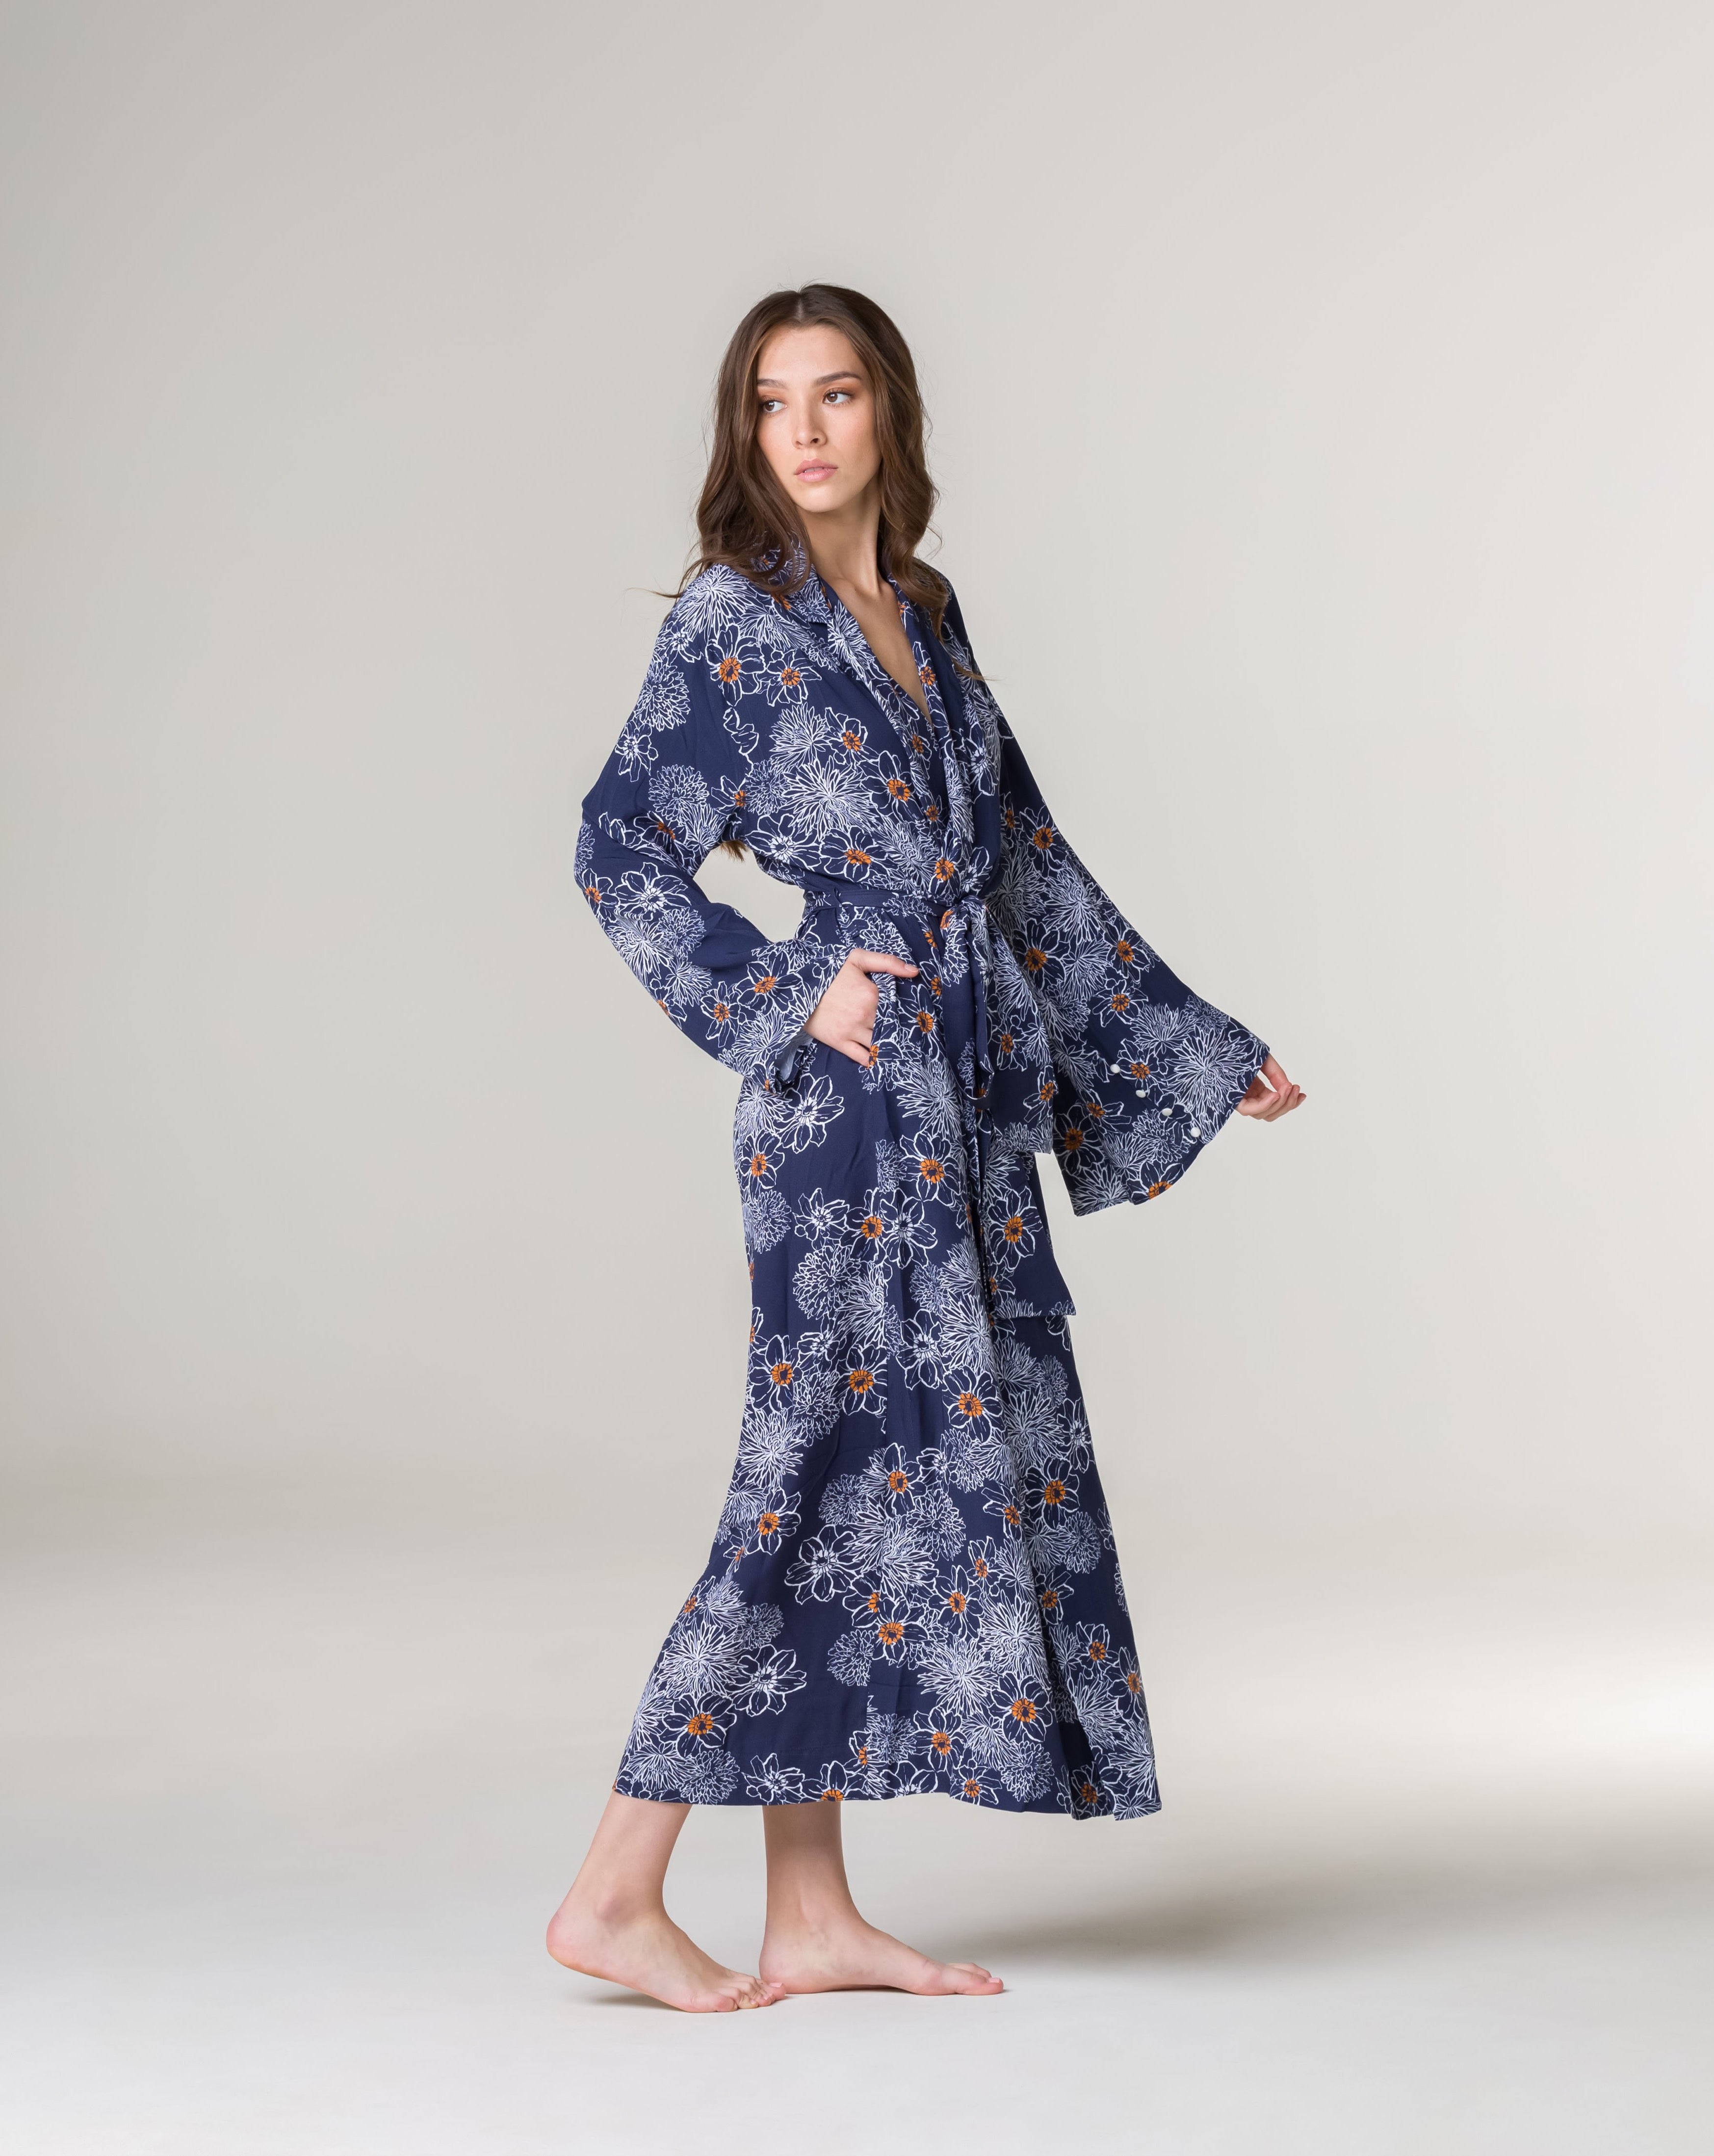 The "Clementine" Robe